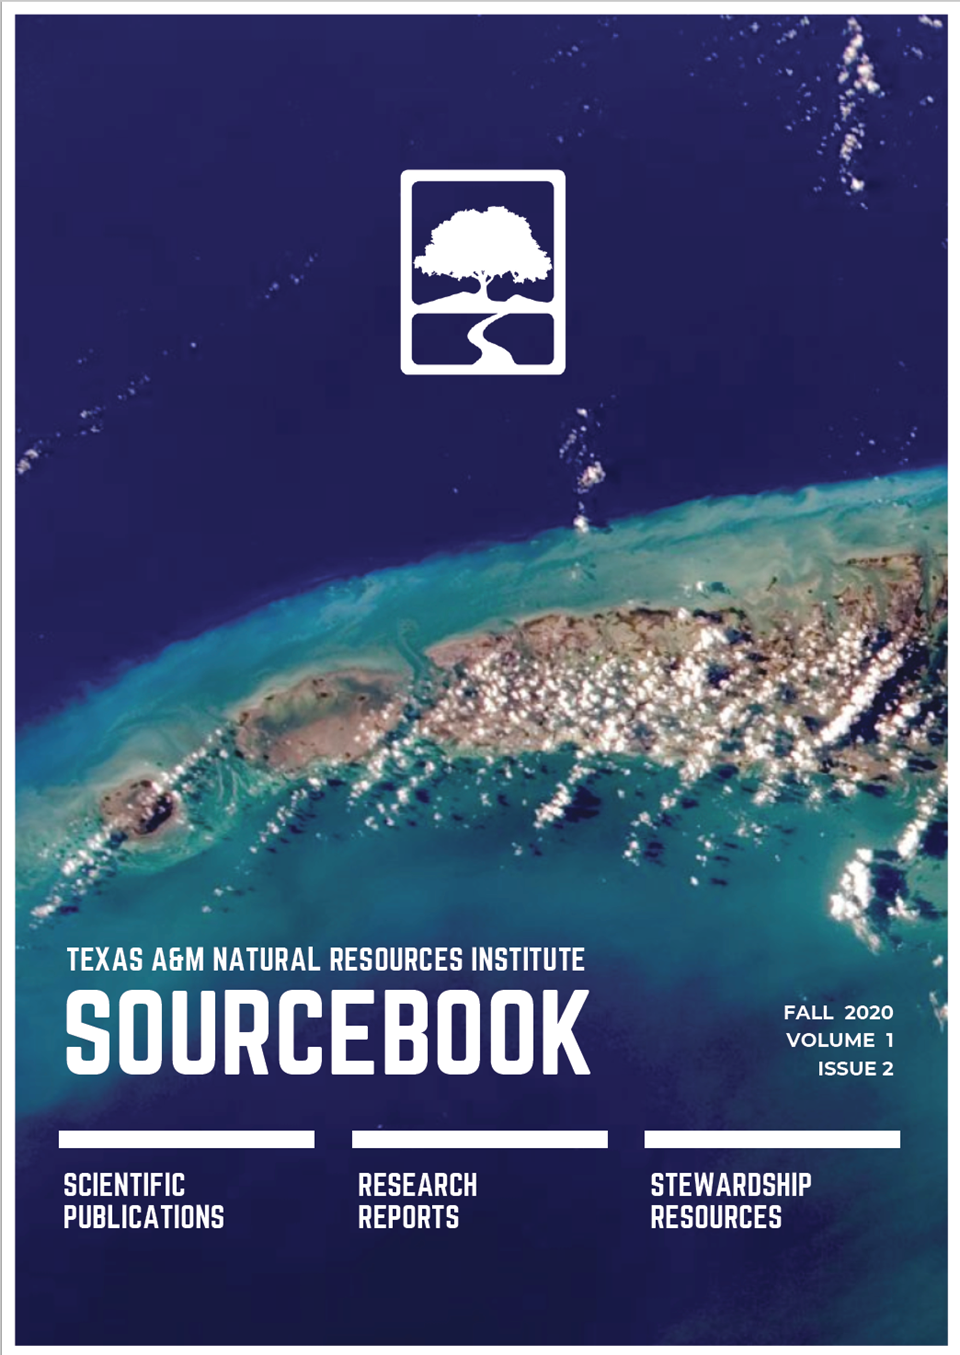 Sourcebook: Fall 2020, Volume 1 Issue 2 